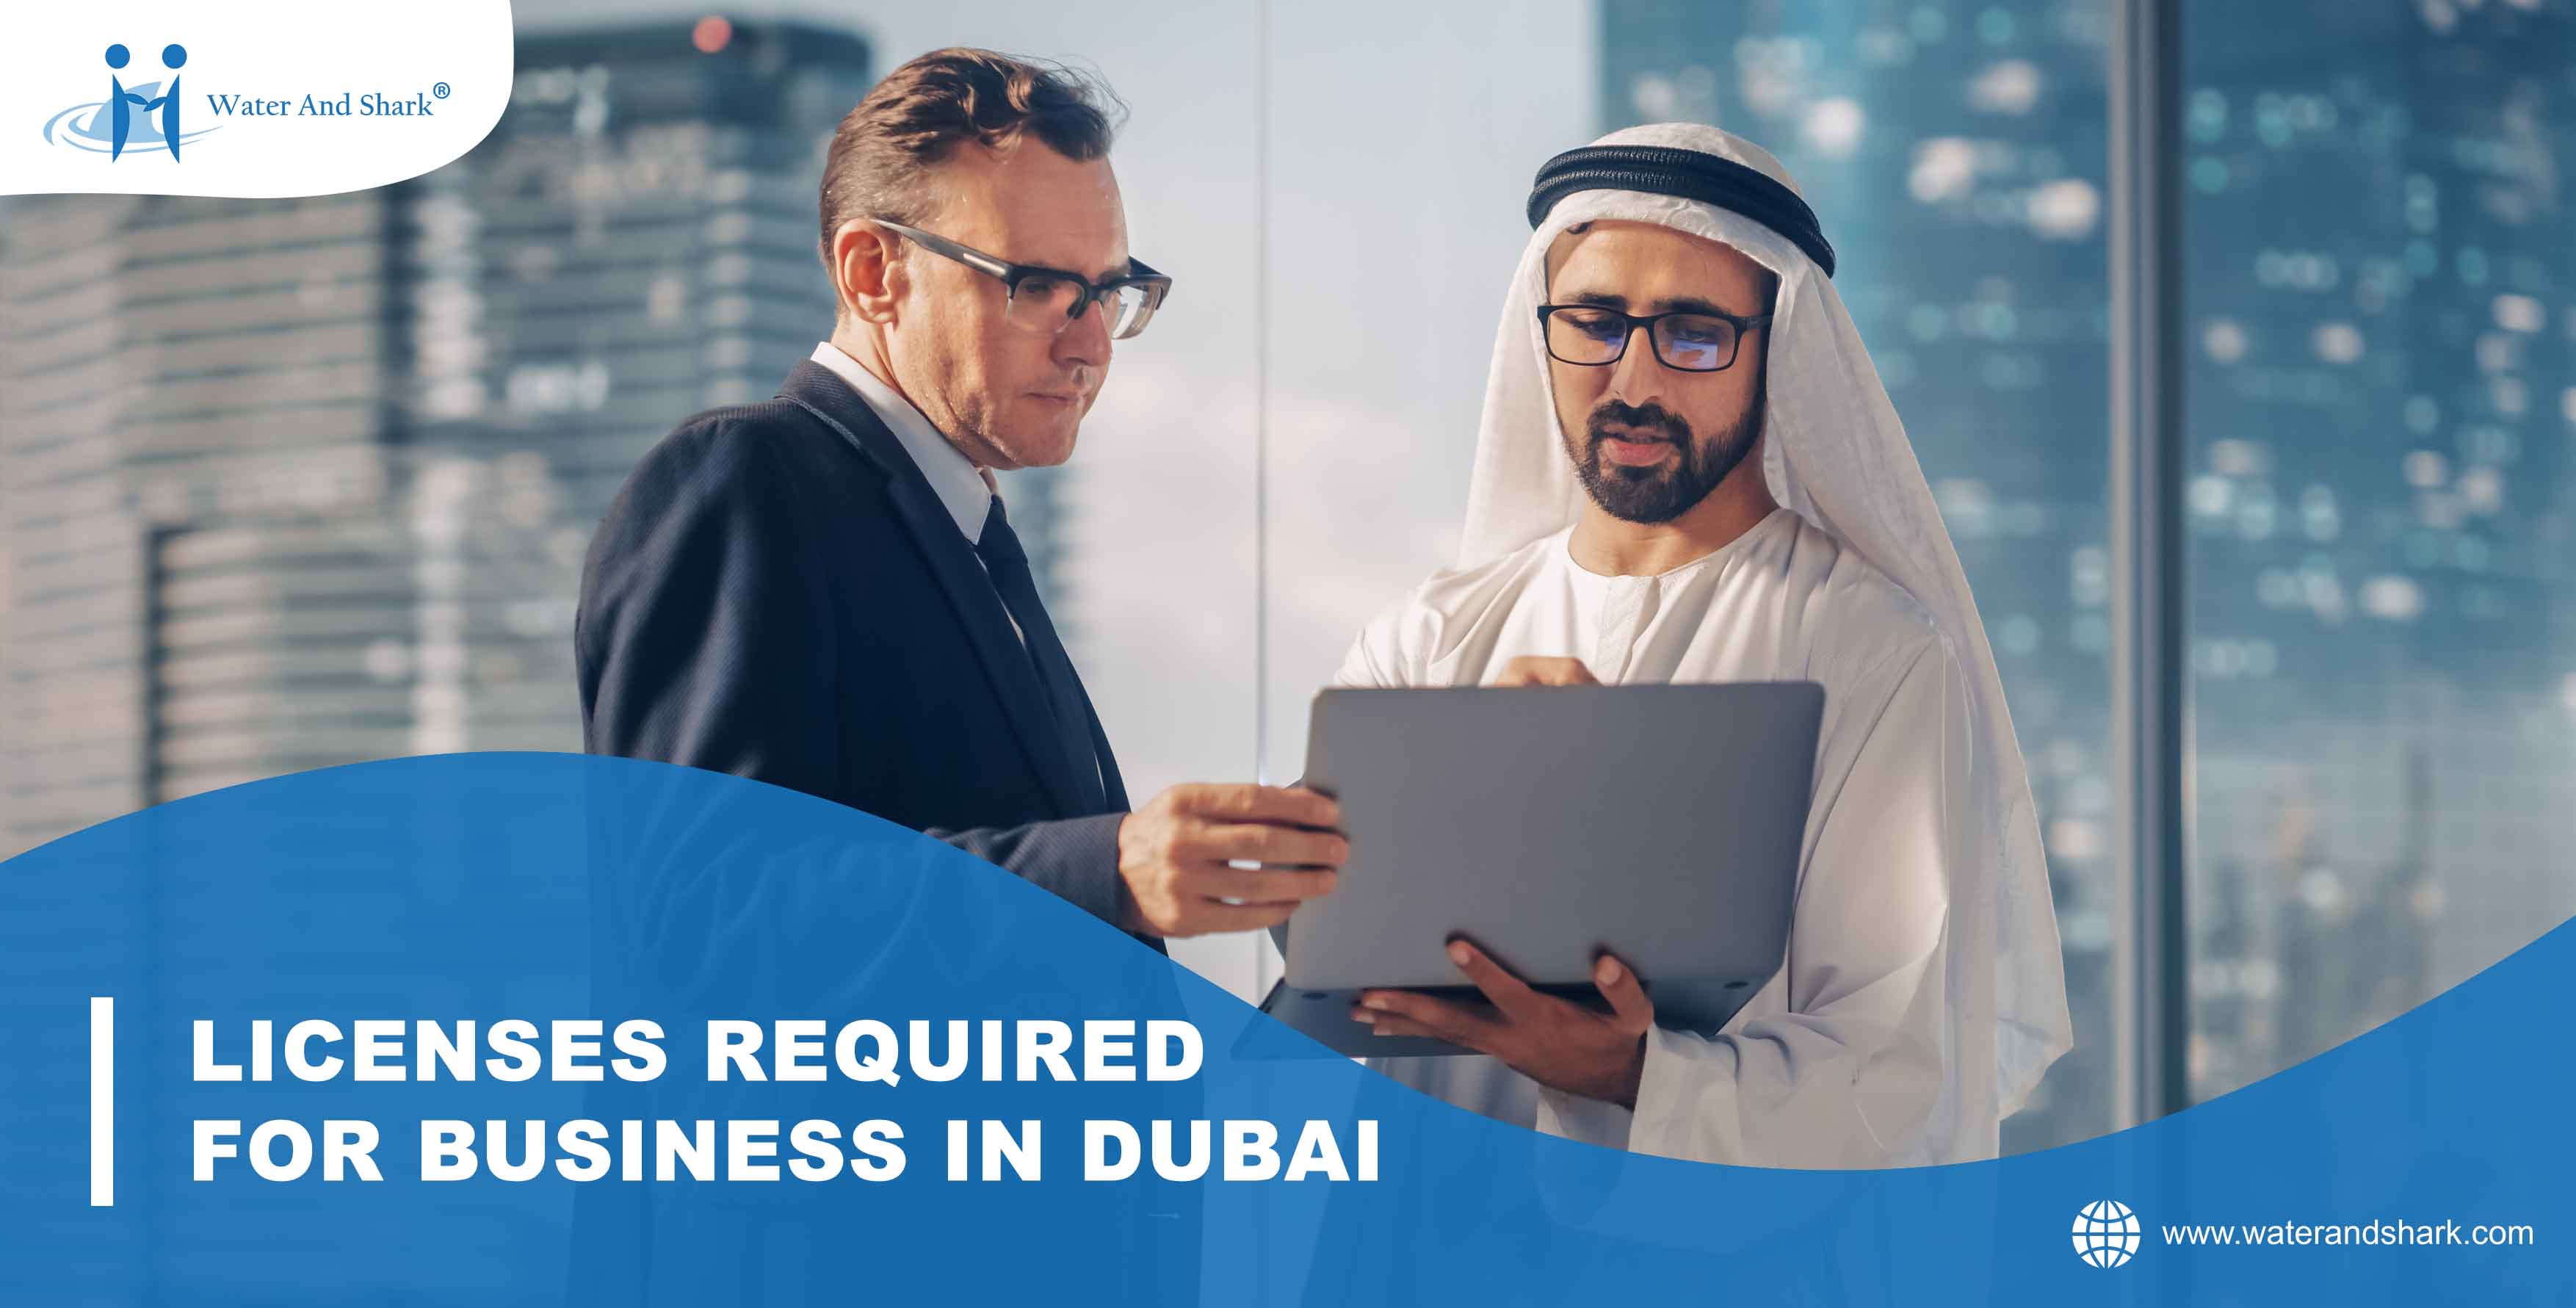 Licenses_required_for_business_in_Dubai_650x1280_low_image.jpg